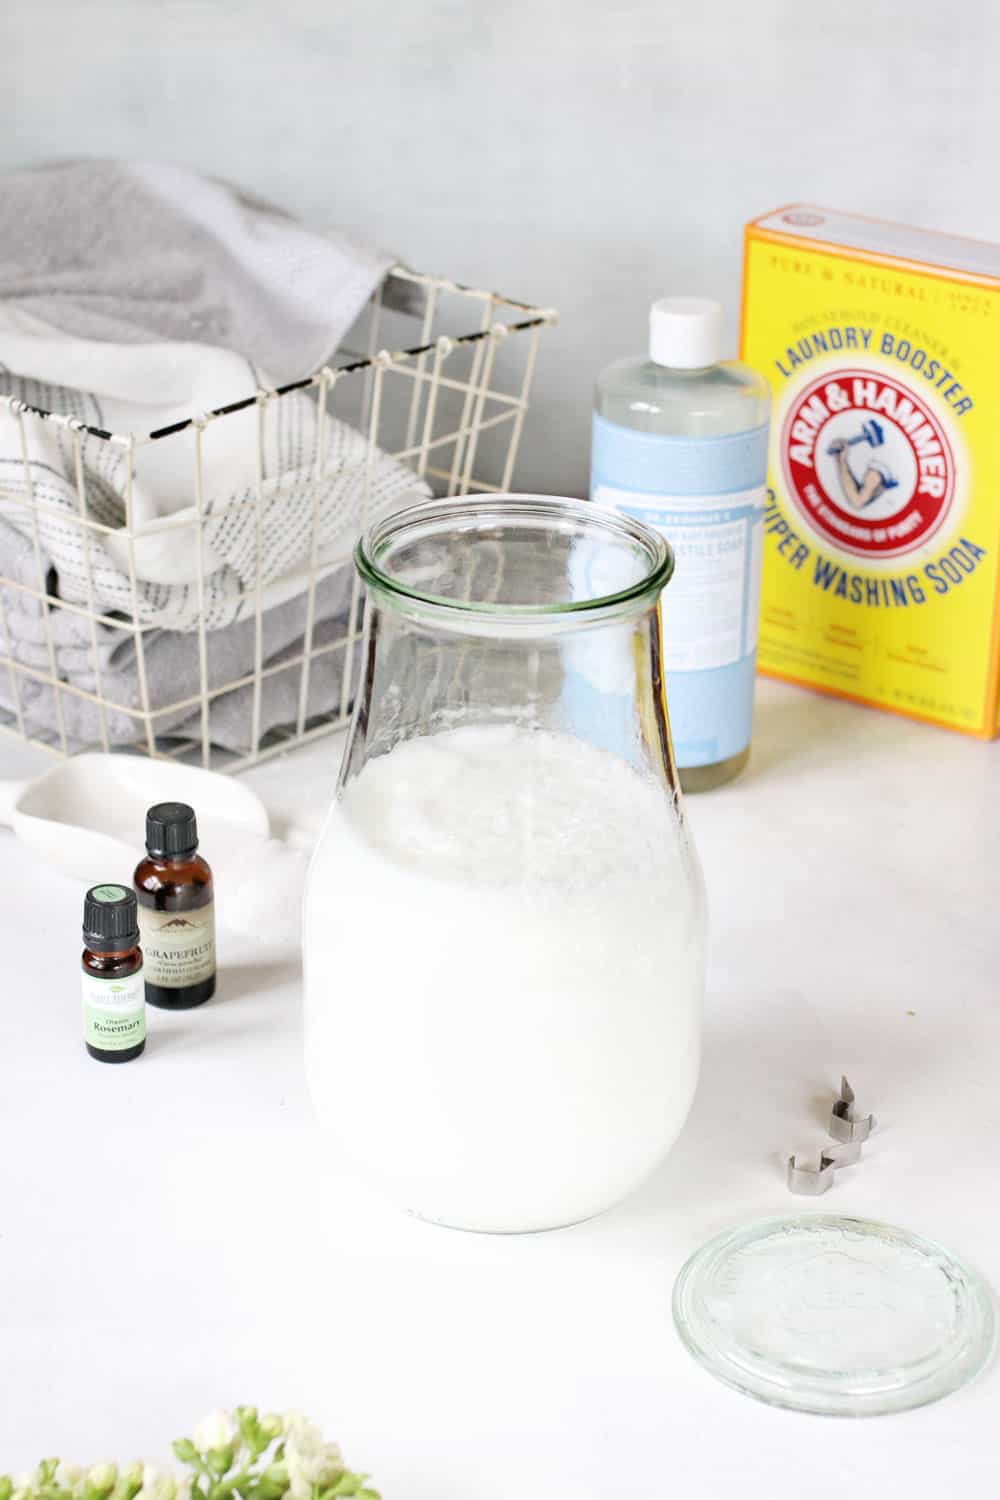 A Completely Natural Liquid Laundry Detergent You Can Make Yourself